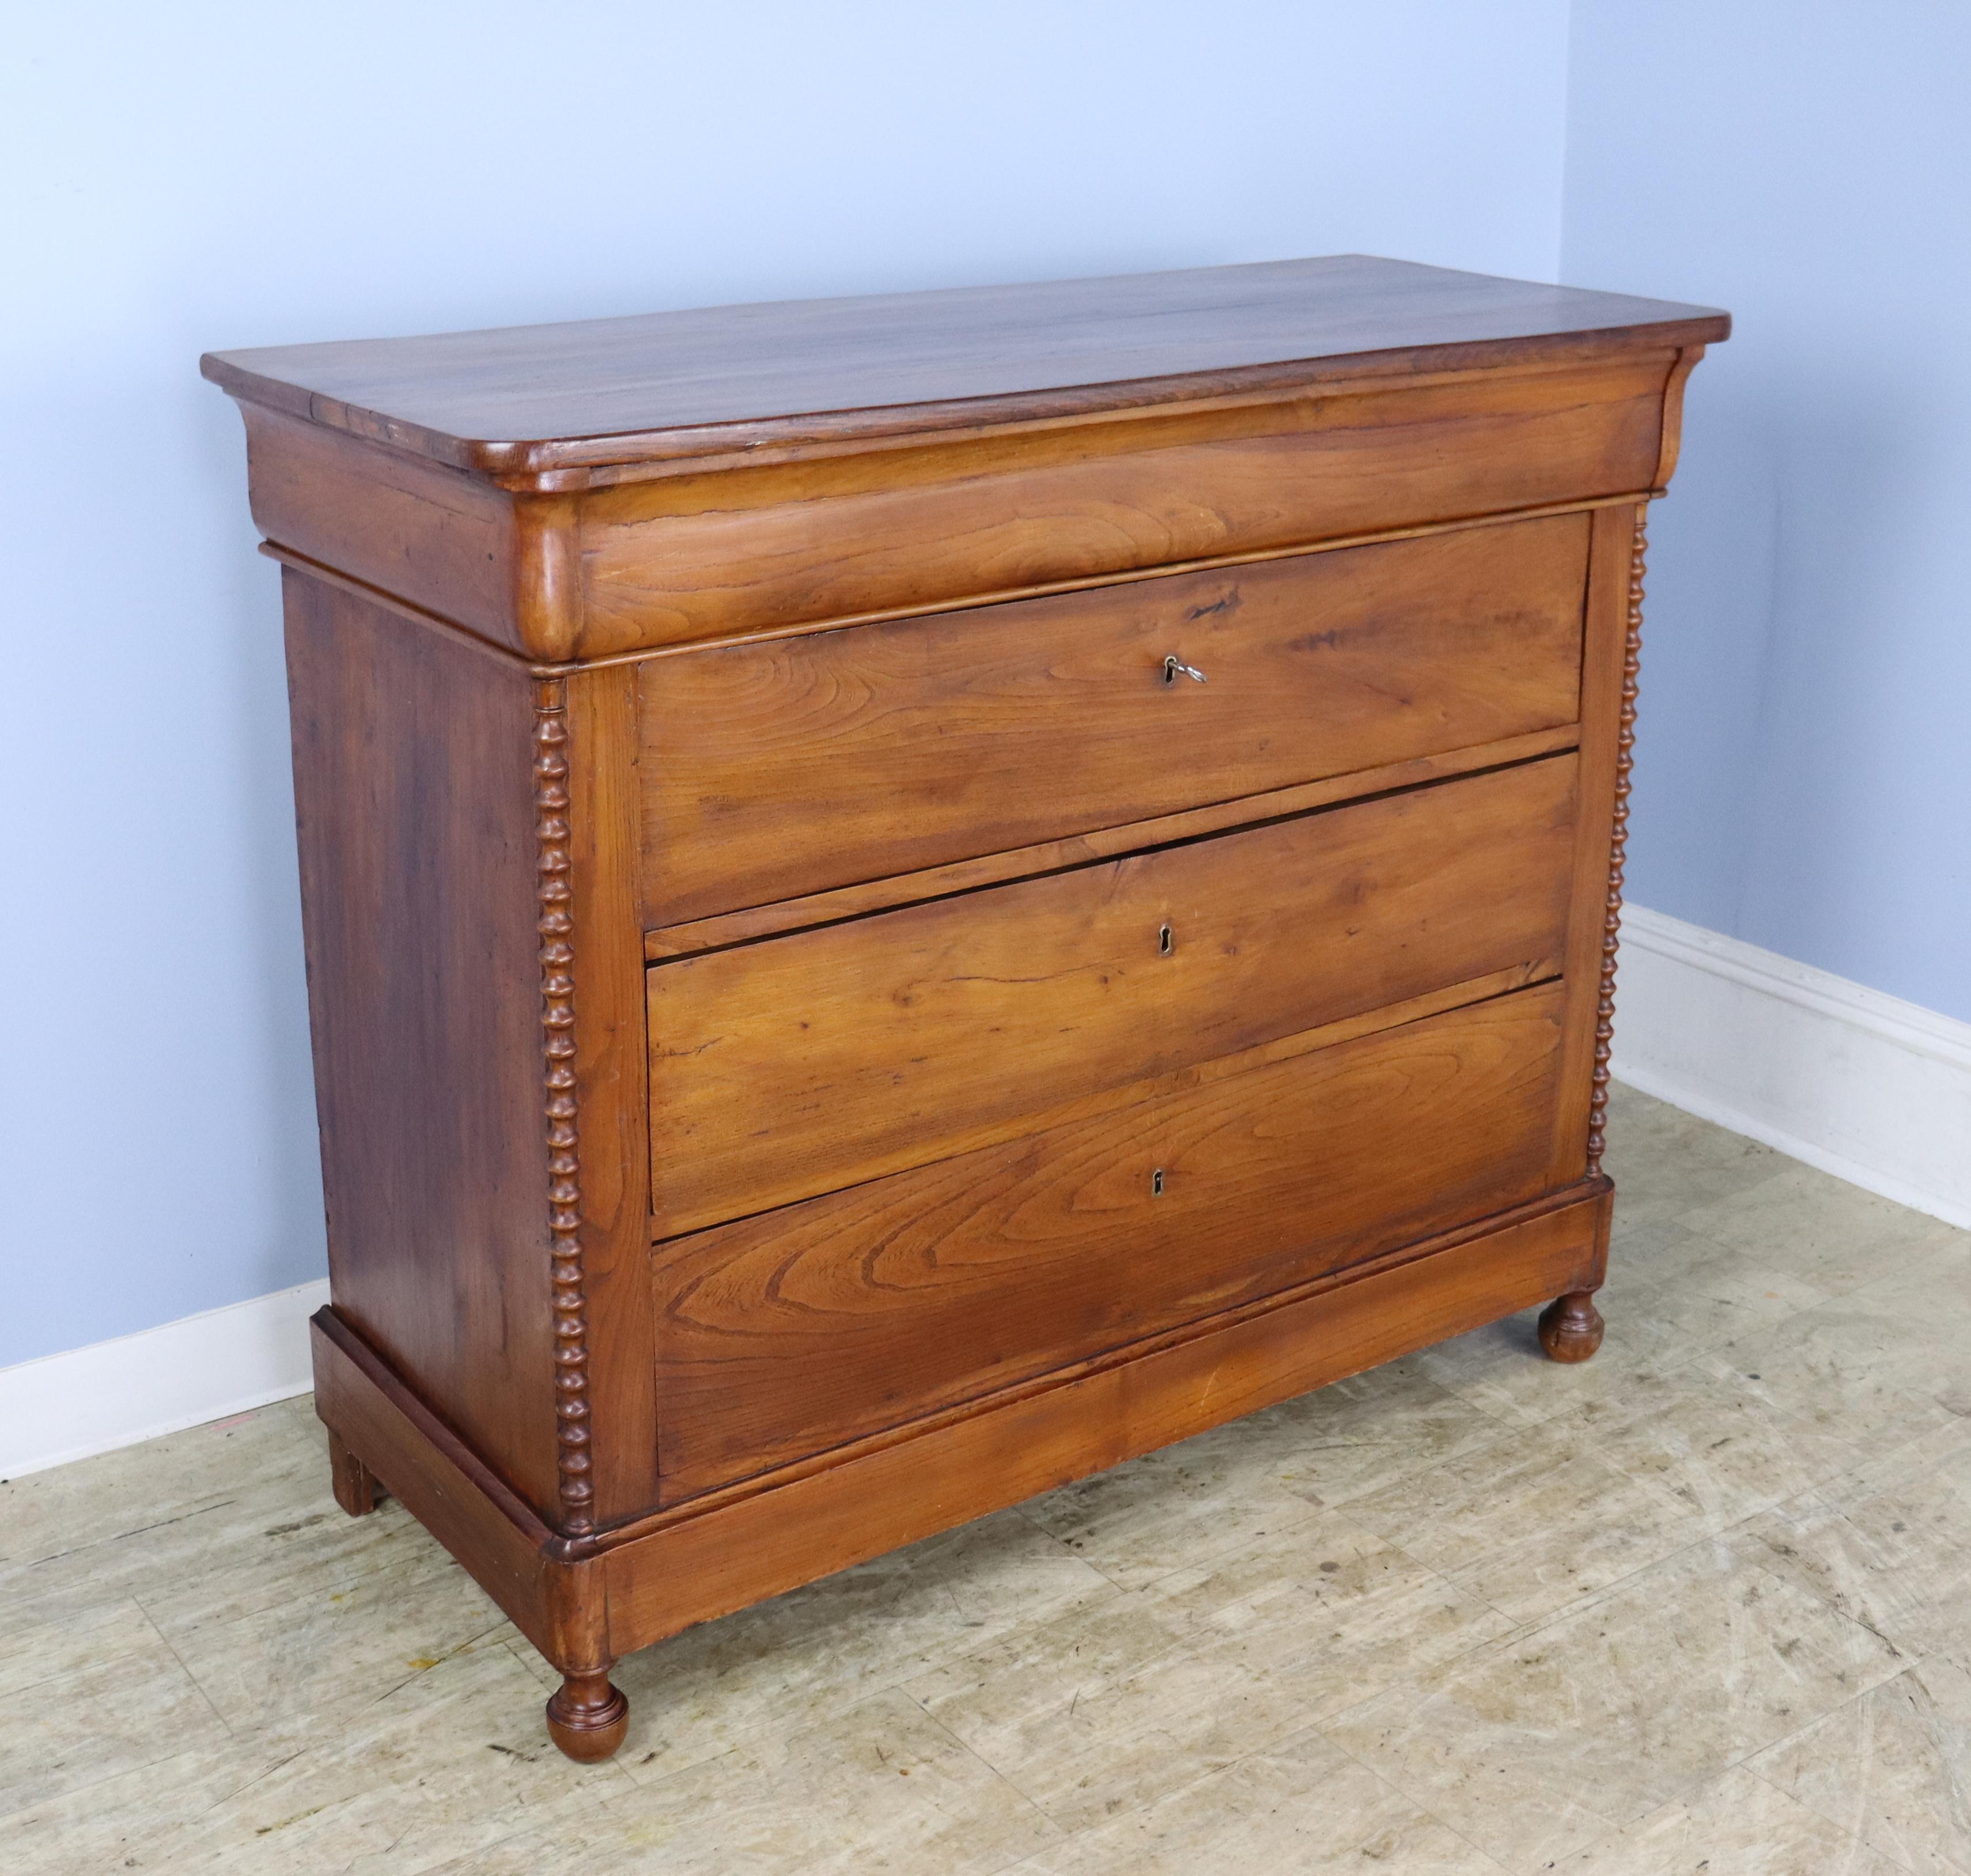 A fanciful French elm chest of drawers with turned columns at either side and sweet ball feet.  Classic Louis Philippe syle molded top drawer.  Single key pulls open all four drawers.  There is a slight warp to the third drawer which causes a small